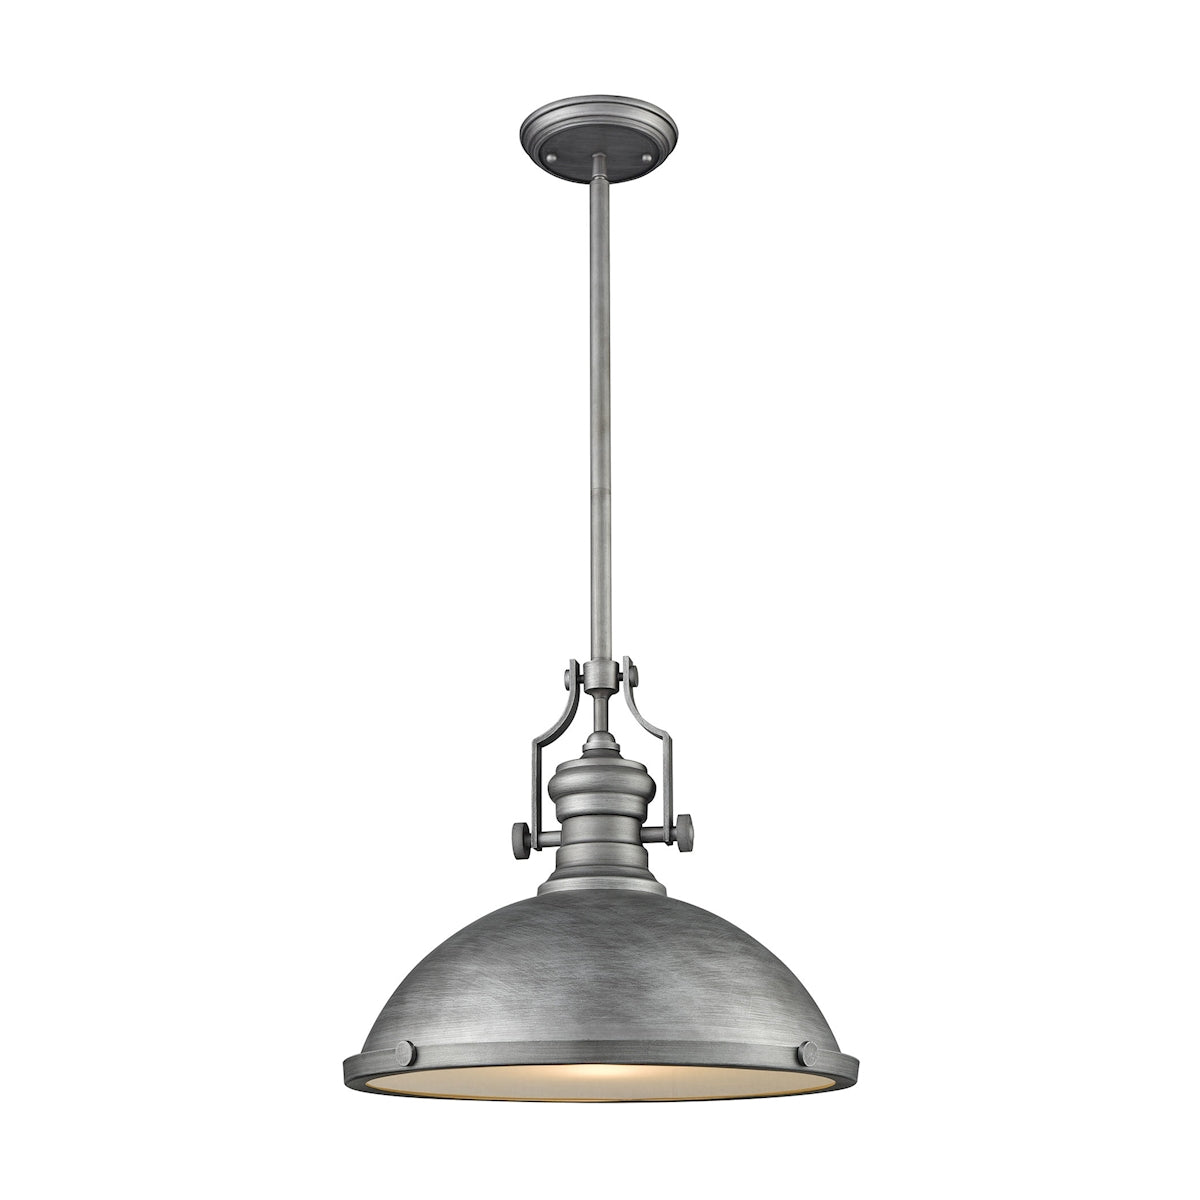 ELK Lighting 66588-1 Chadwick 1-Light Pendant in Weathered Zinc with Metal and Frosted Glass Diffuser